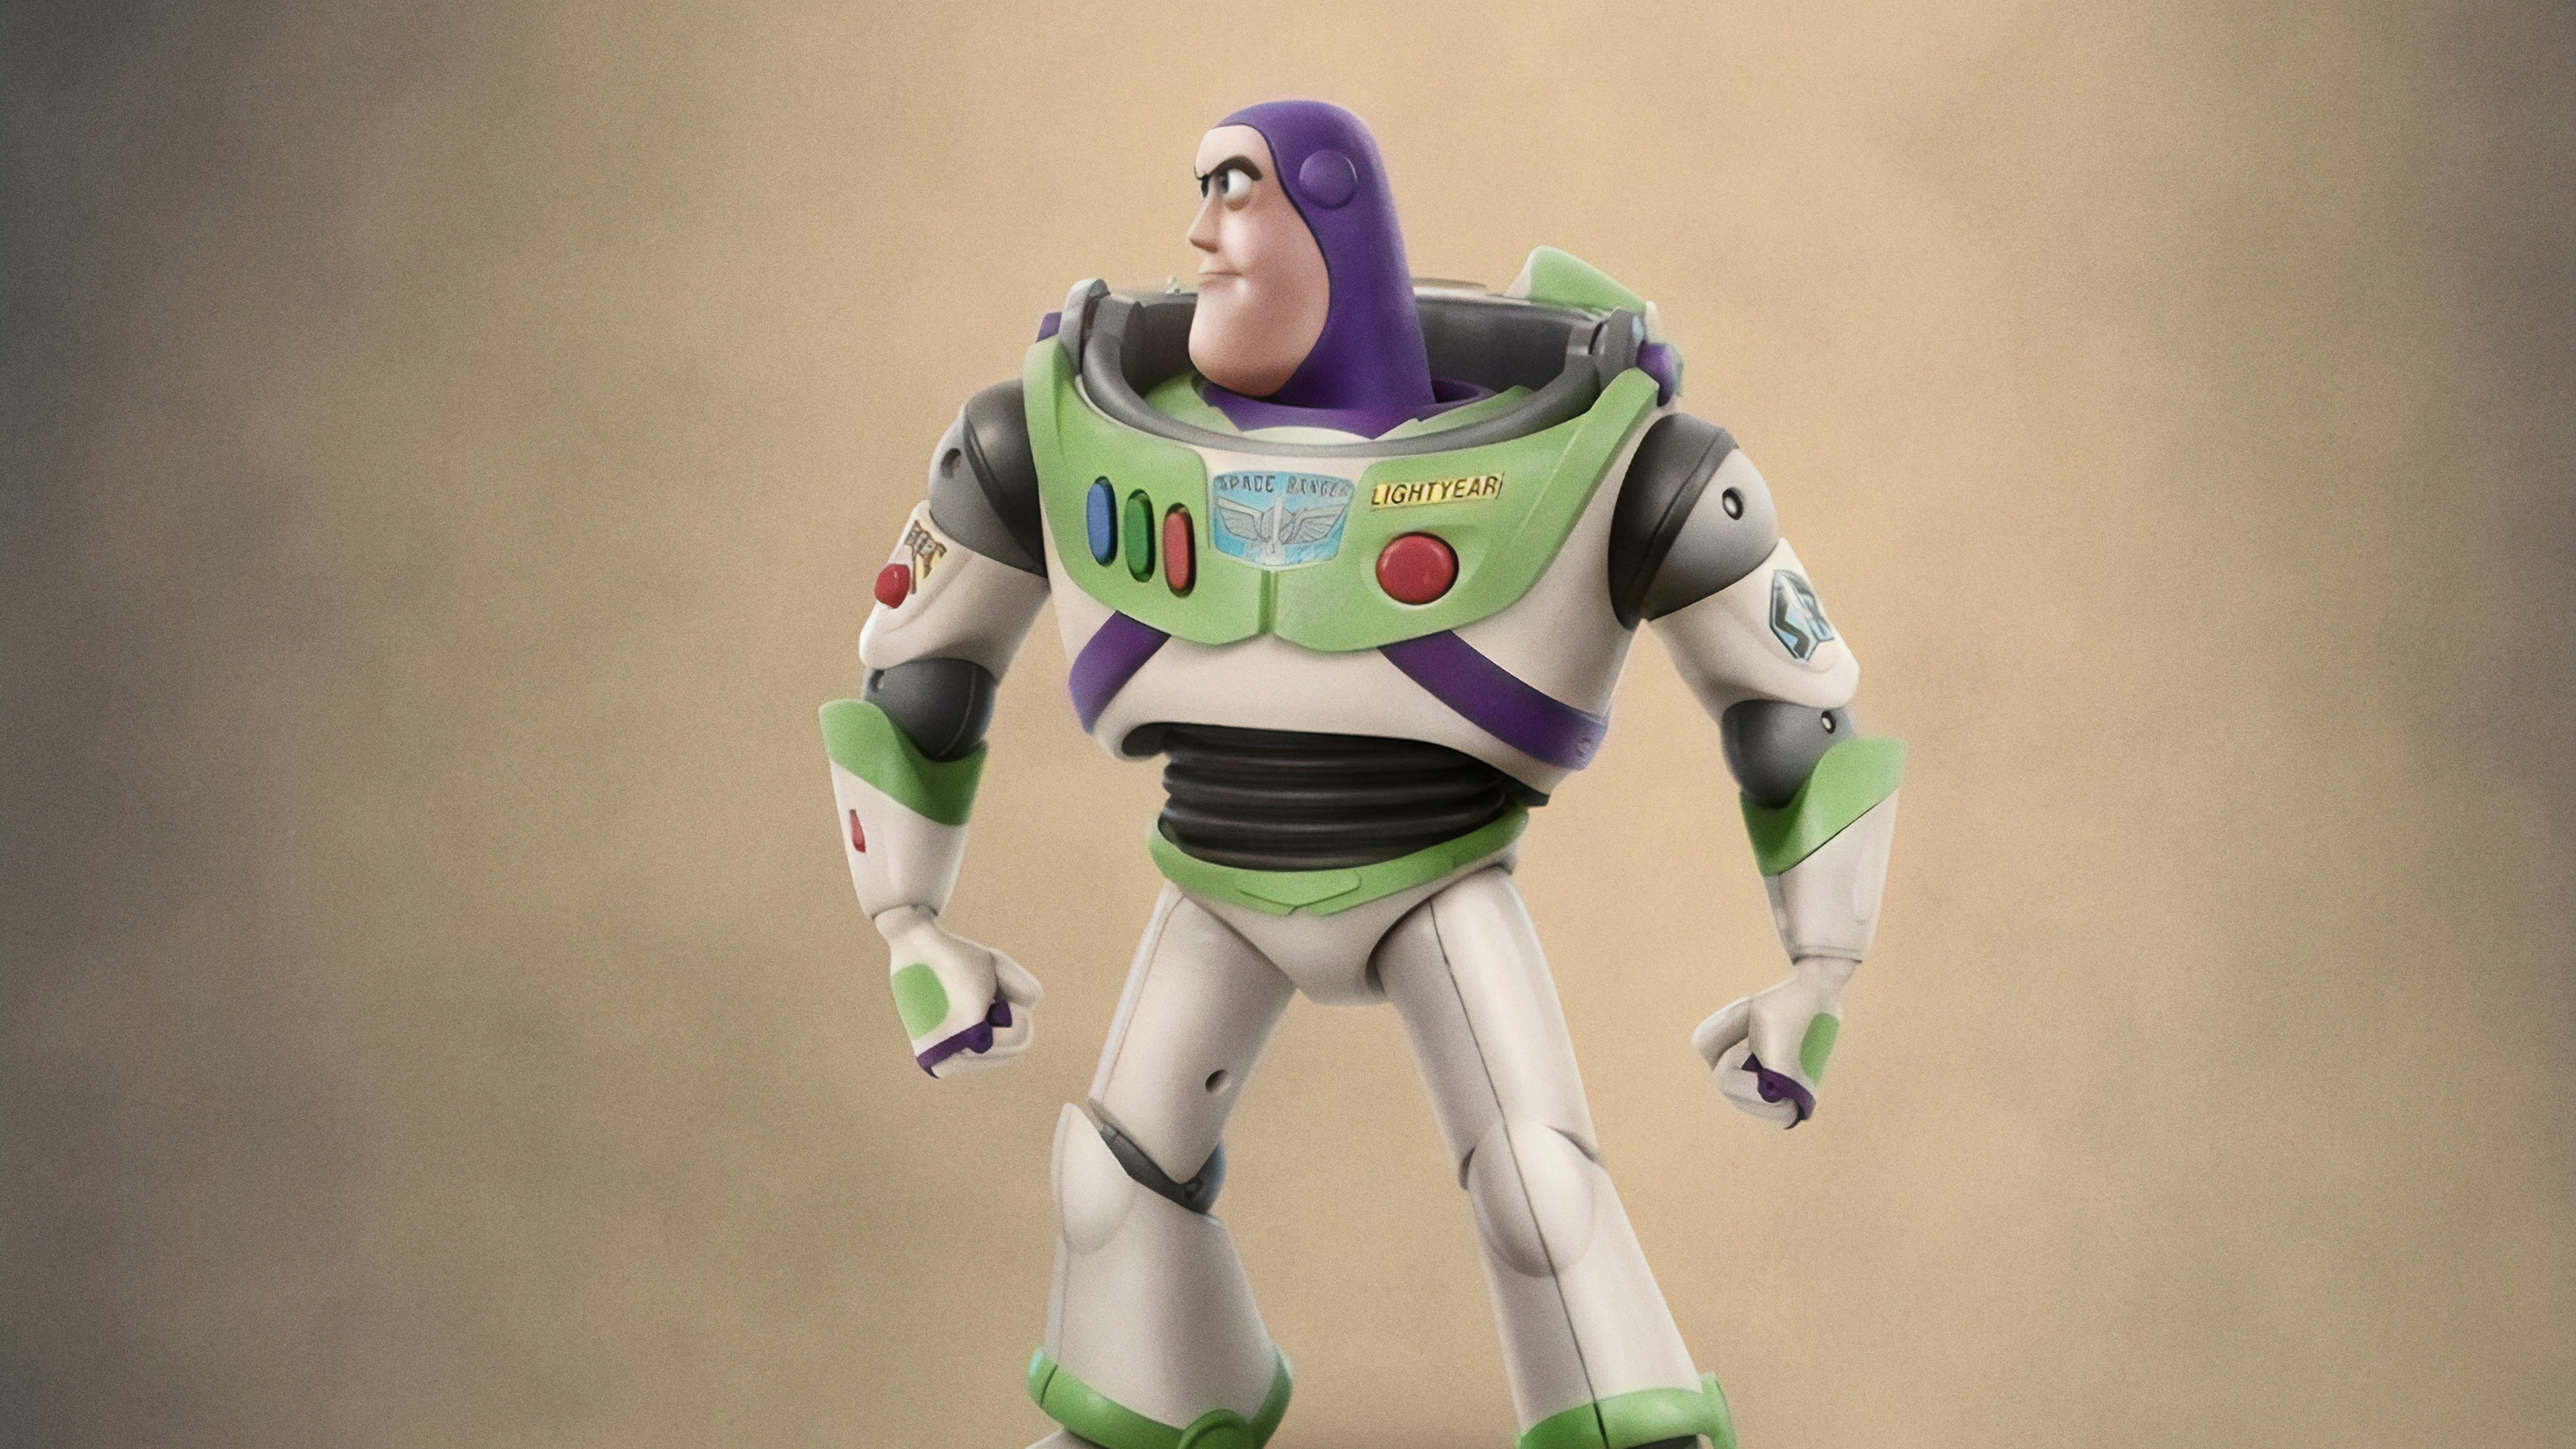 buzz lightyear wallpaper,toy,action figure,figurine,fictional character,animation